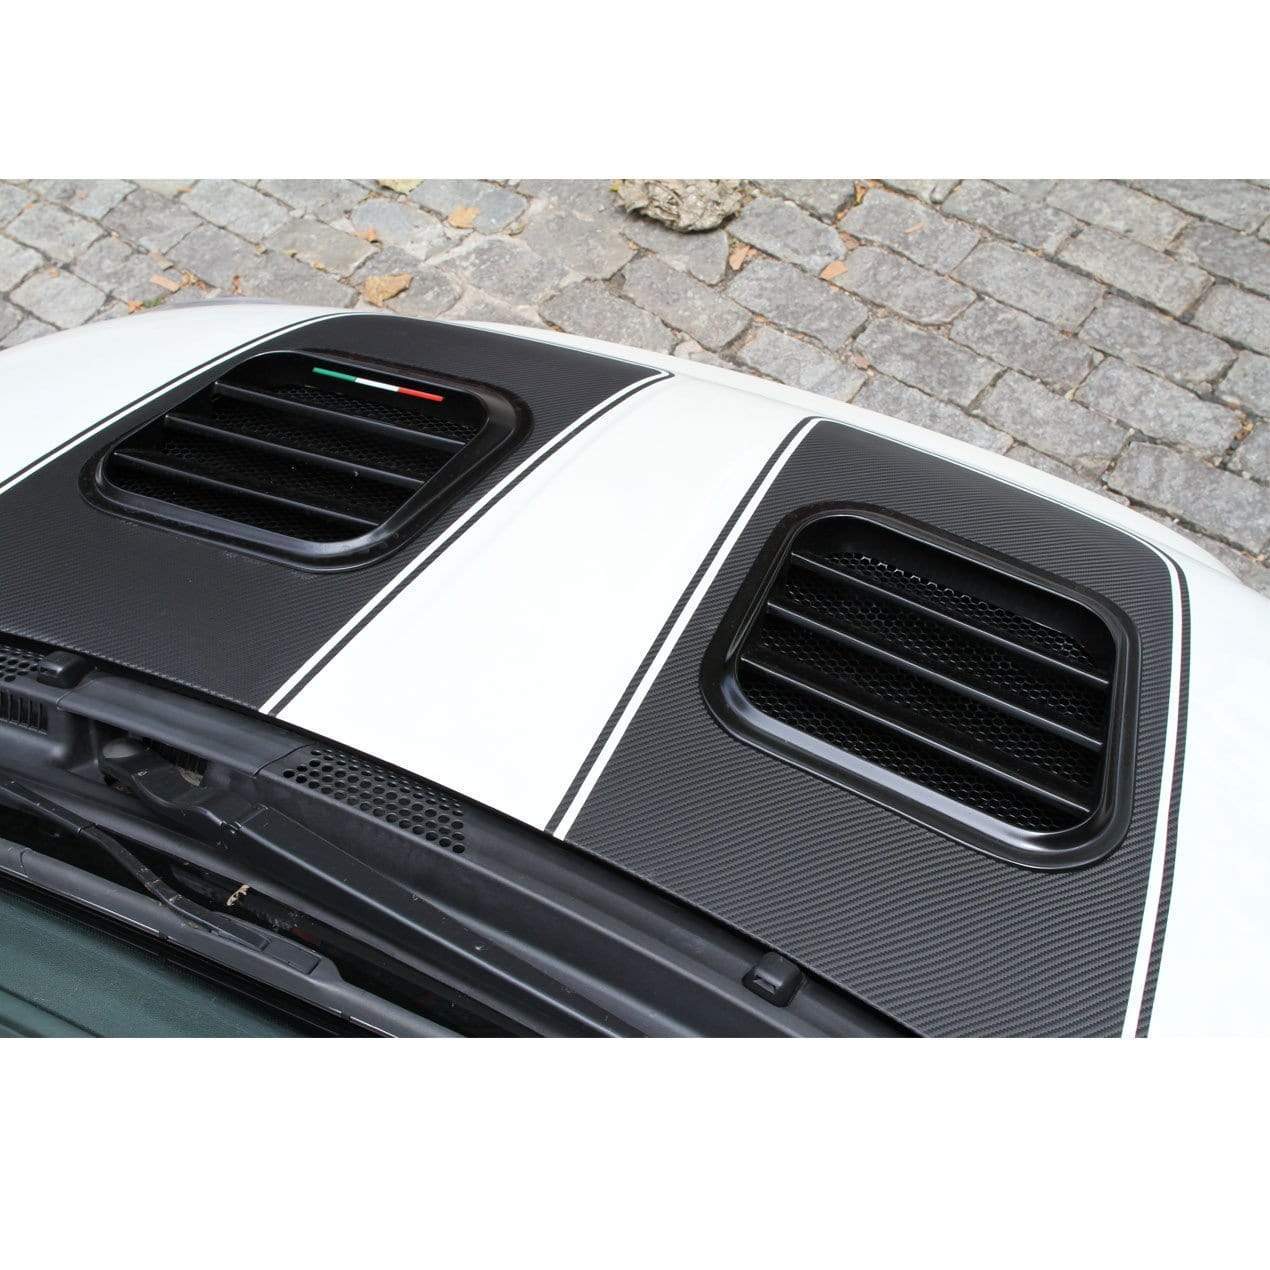 ACS Composite Dual Extractor Hood Port System for Fiat 500, SKU 40-4-036: Hood with dual extractors for enhanced cooling and performance.